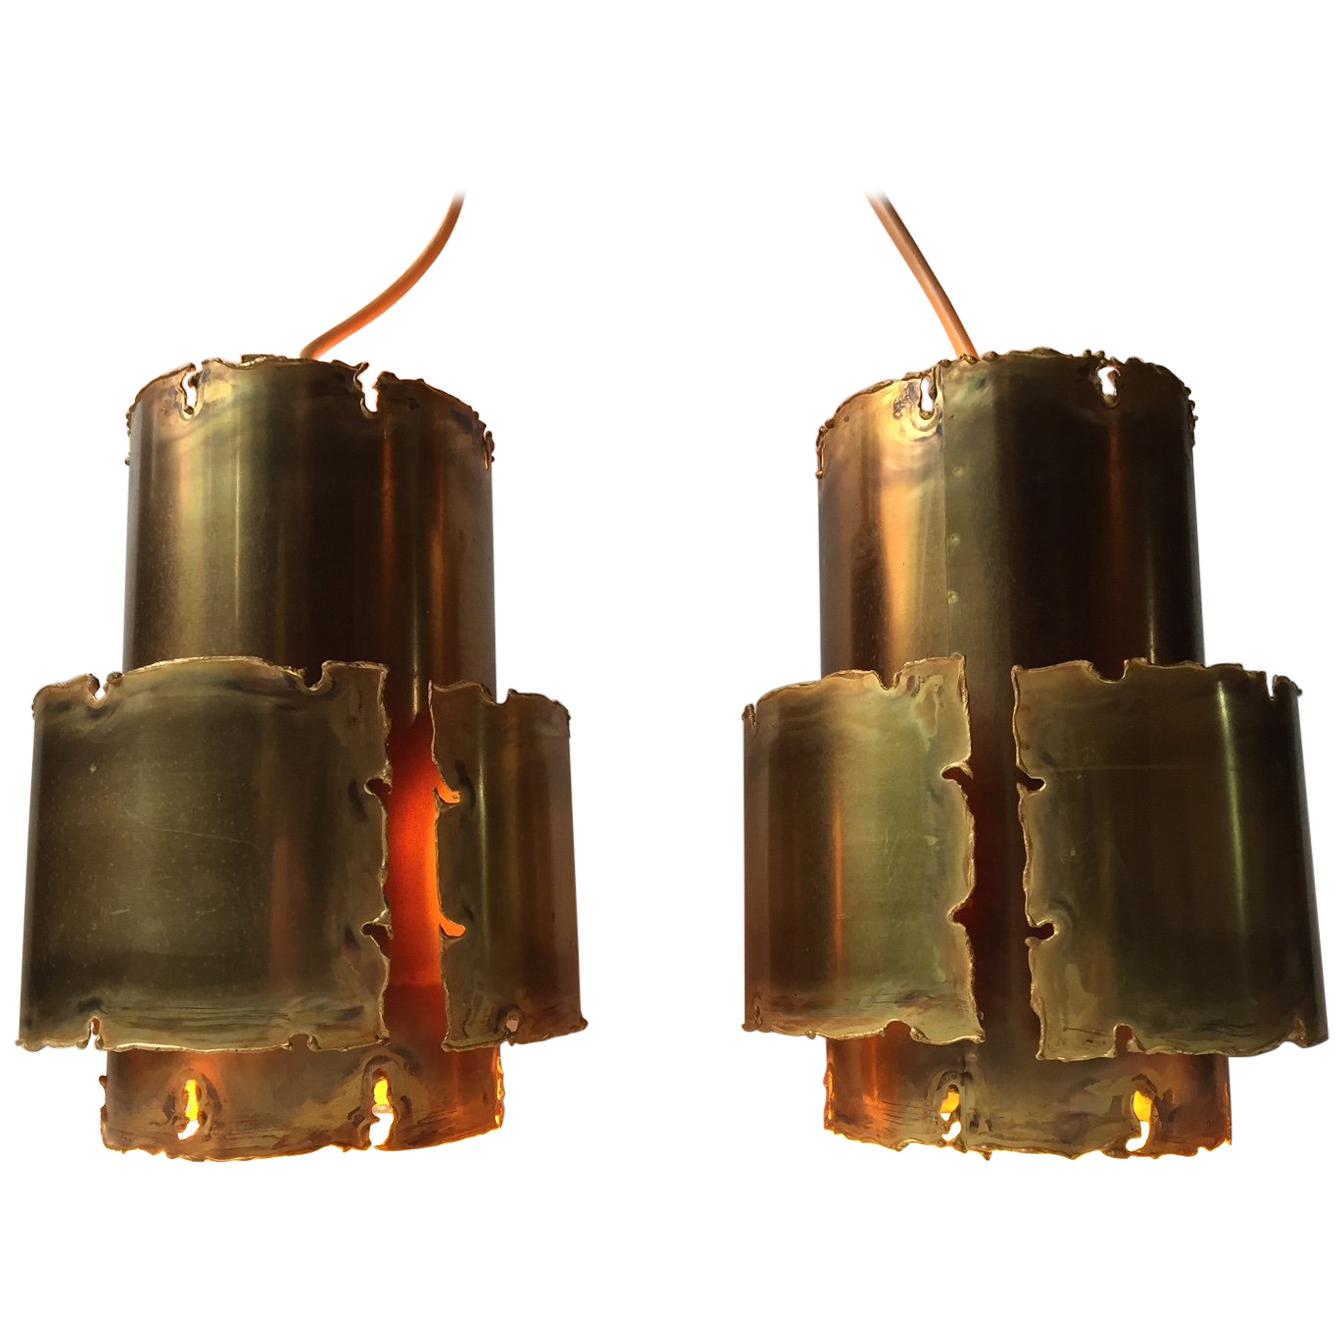 Pair of Brutalist Brass Pendant Lamps by Svend Aage Holm Sørensen, 1960s